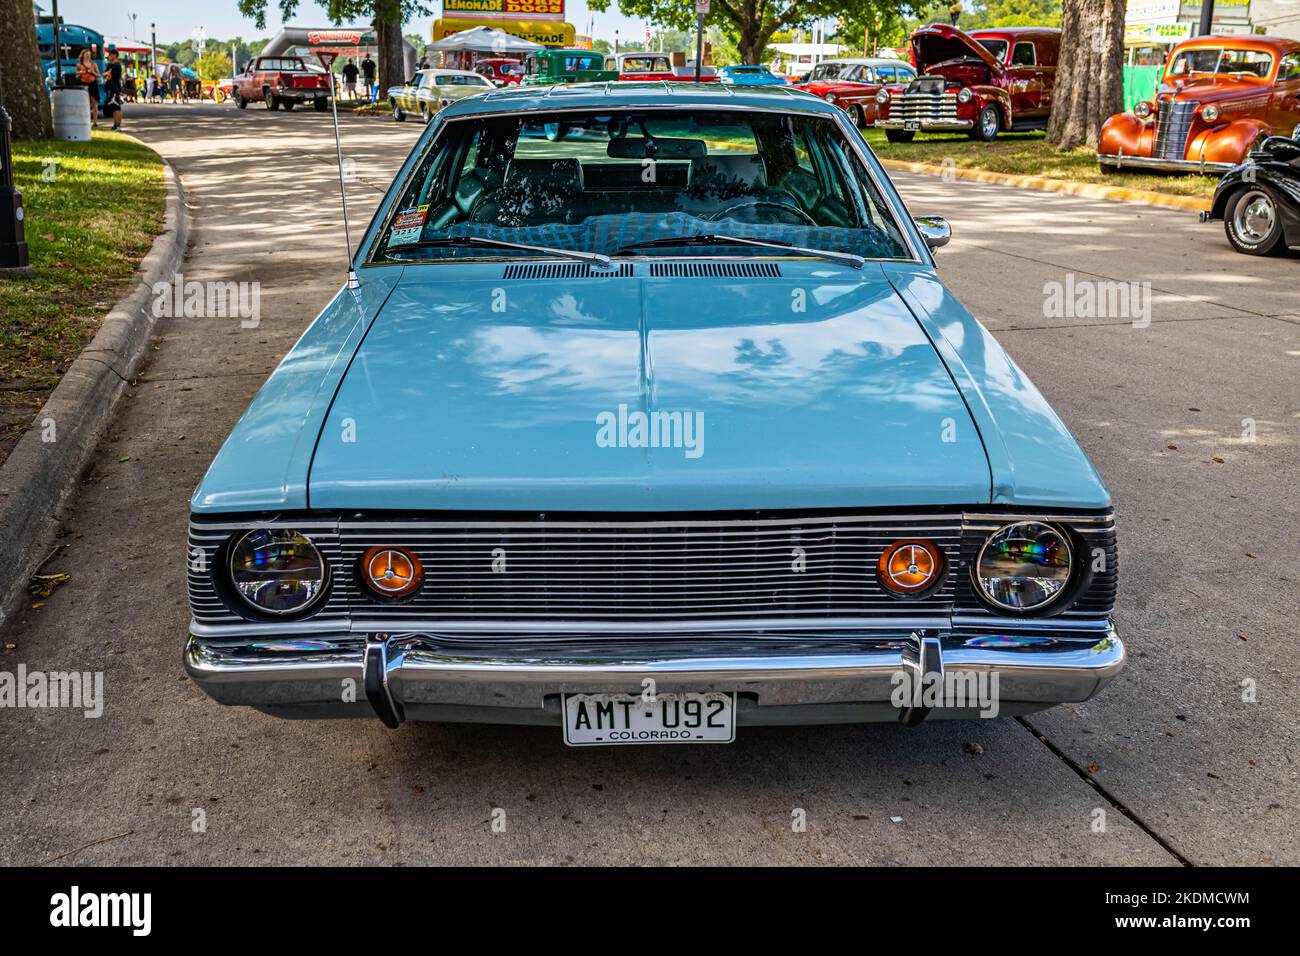 Des Moines, IA - July 01, 2022: High perspective front view of a 1971 AMC Hornet Sportabout Wagon at a local car show. Stock Photo